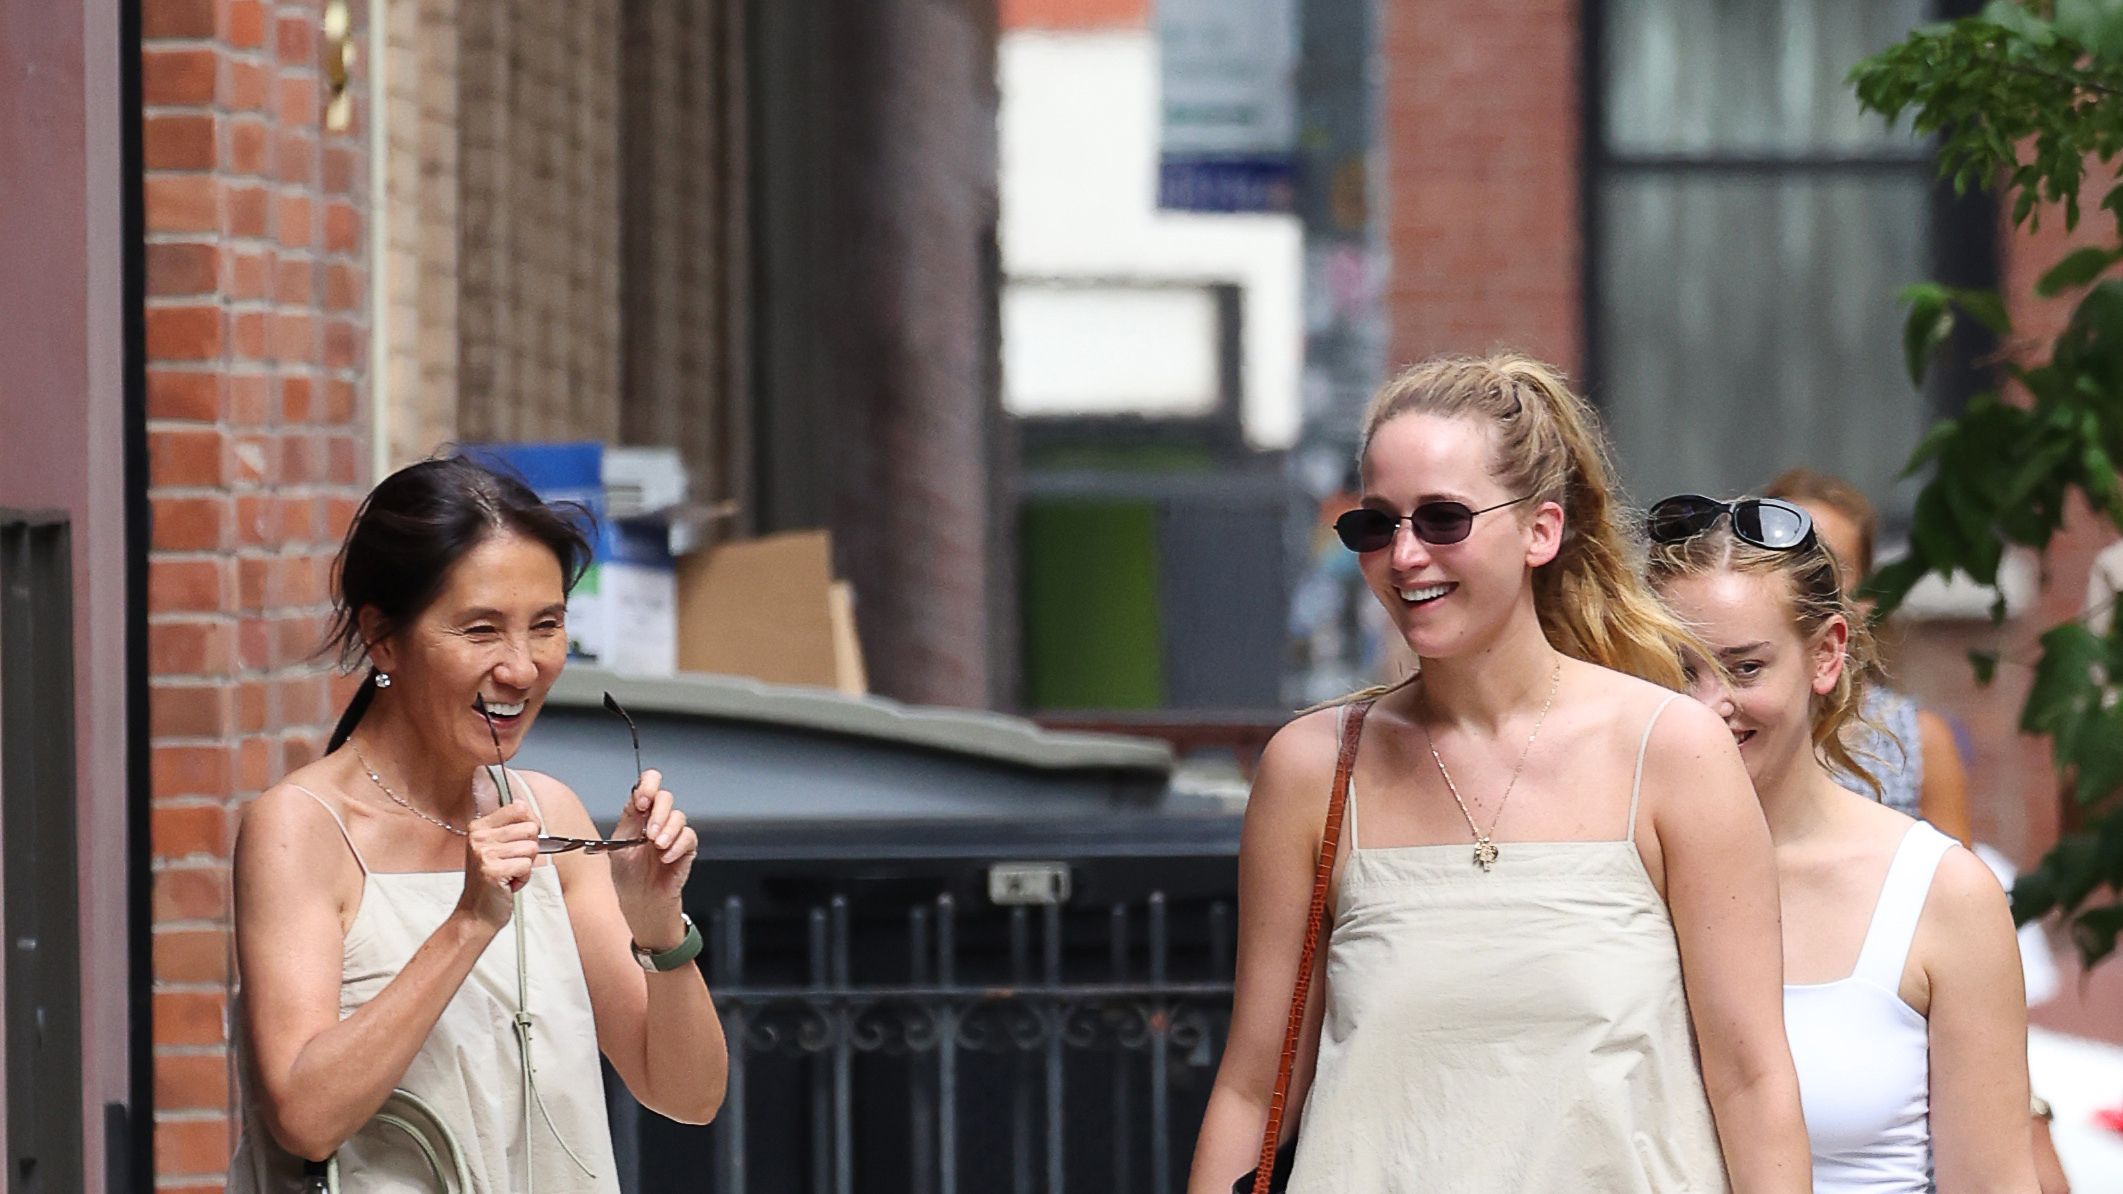 Jennifer Lawrence Does Date Night in a Beige Co-ord and Her Favorite Tote